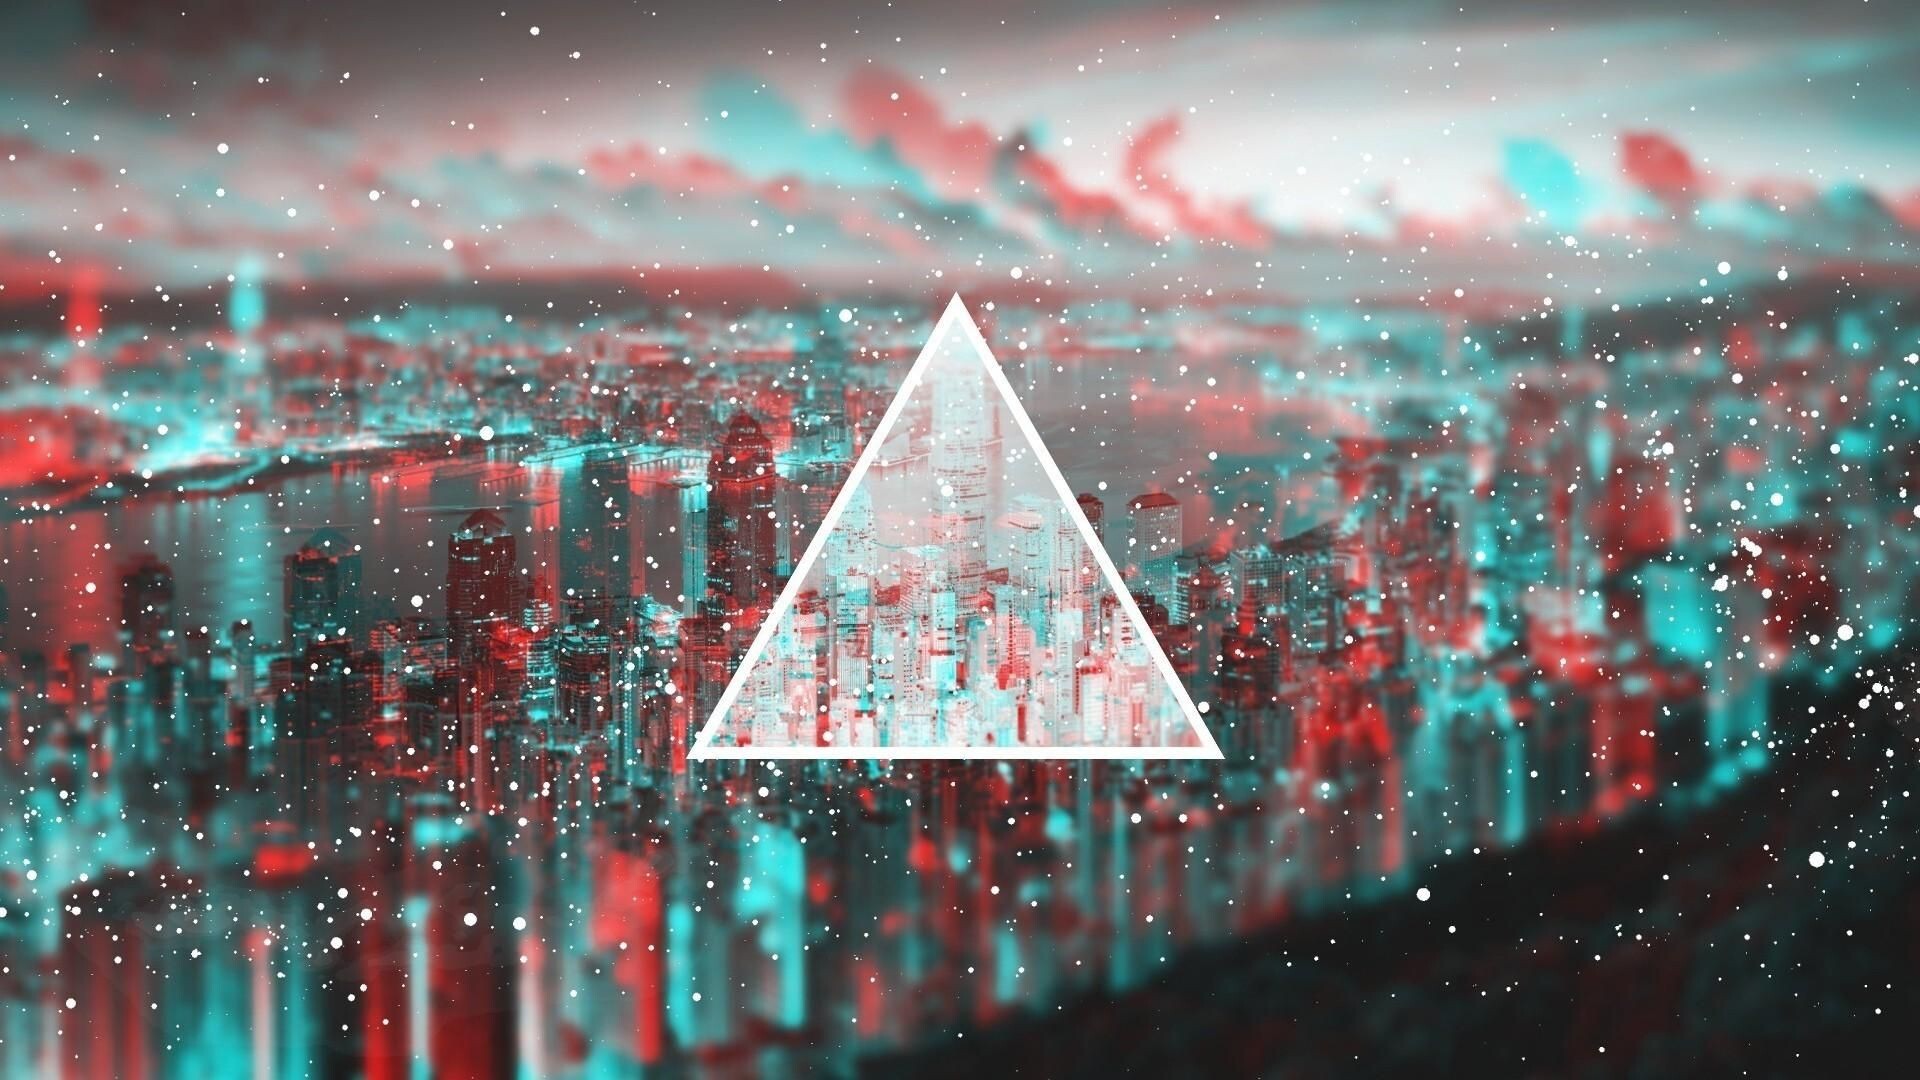 Glitch: Equilateral triangle, Cityscape, A sudden software malfunction, Inverted colors. 1920x1080 Full HD Wallpaper.